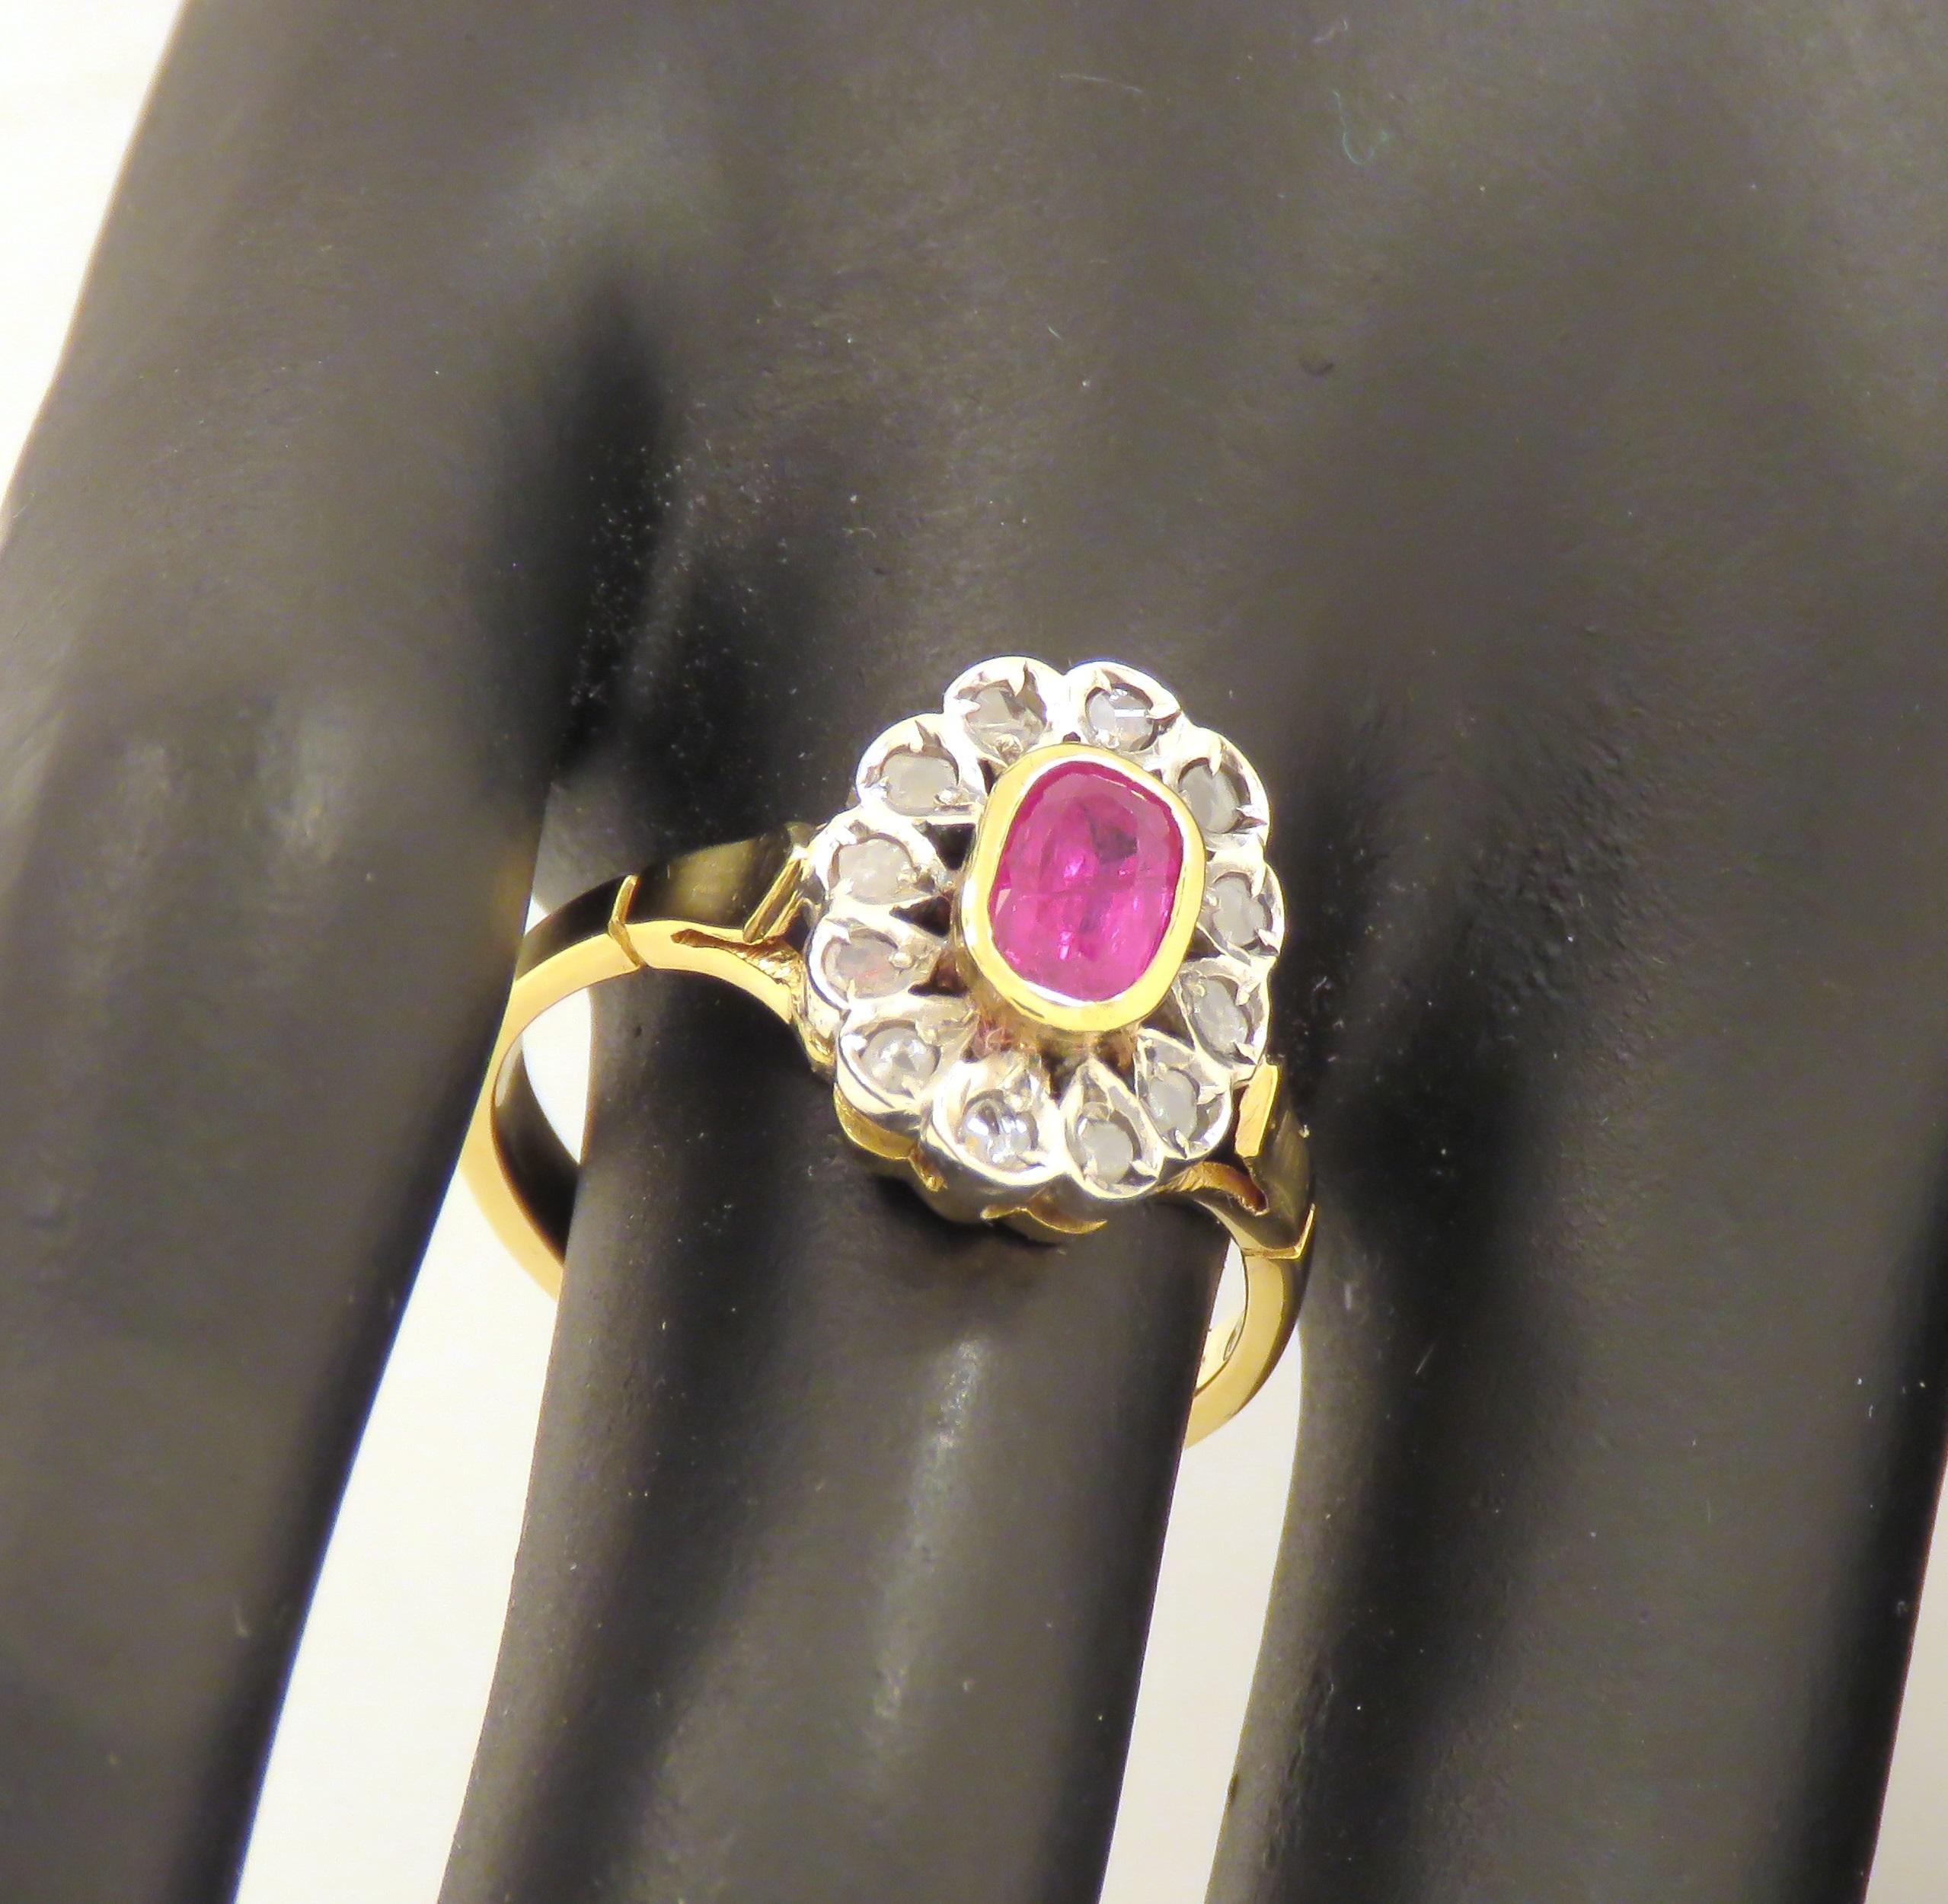 Beautiful vintage ring handcrafted in silver and 18 karat yellow gold featuring a bejeweled flower made of an oval cut ruby 1.00 ctw circa surrounded by 12 rose cut diamonds. The dimension of the ruby is: 7x4 mm 0.275x0.157 inches. US finger size is